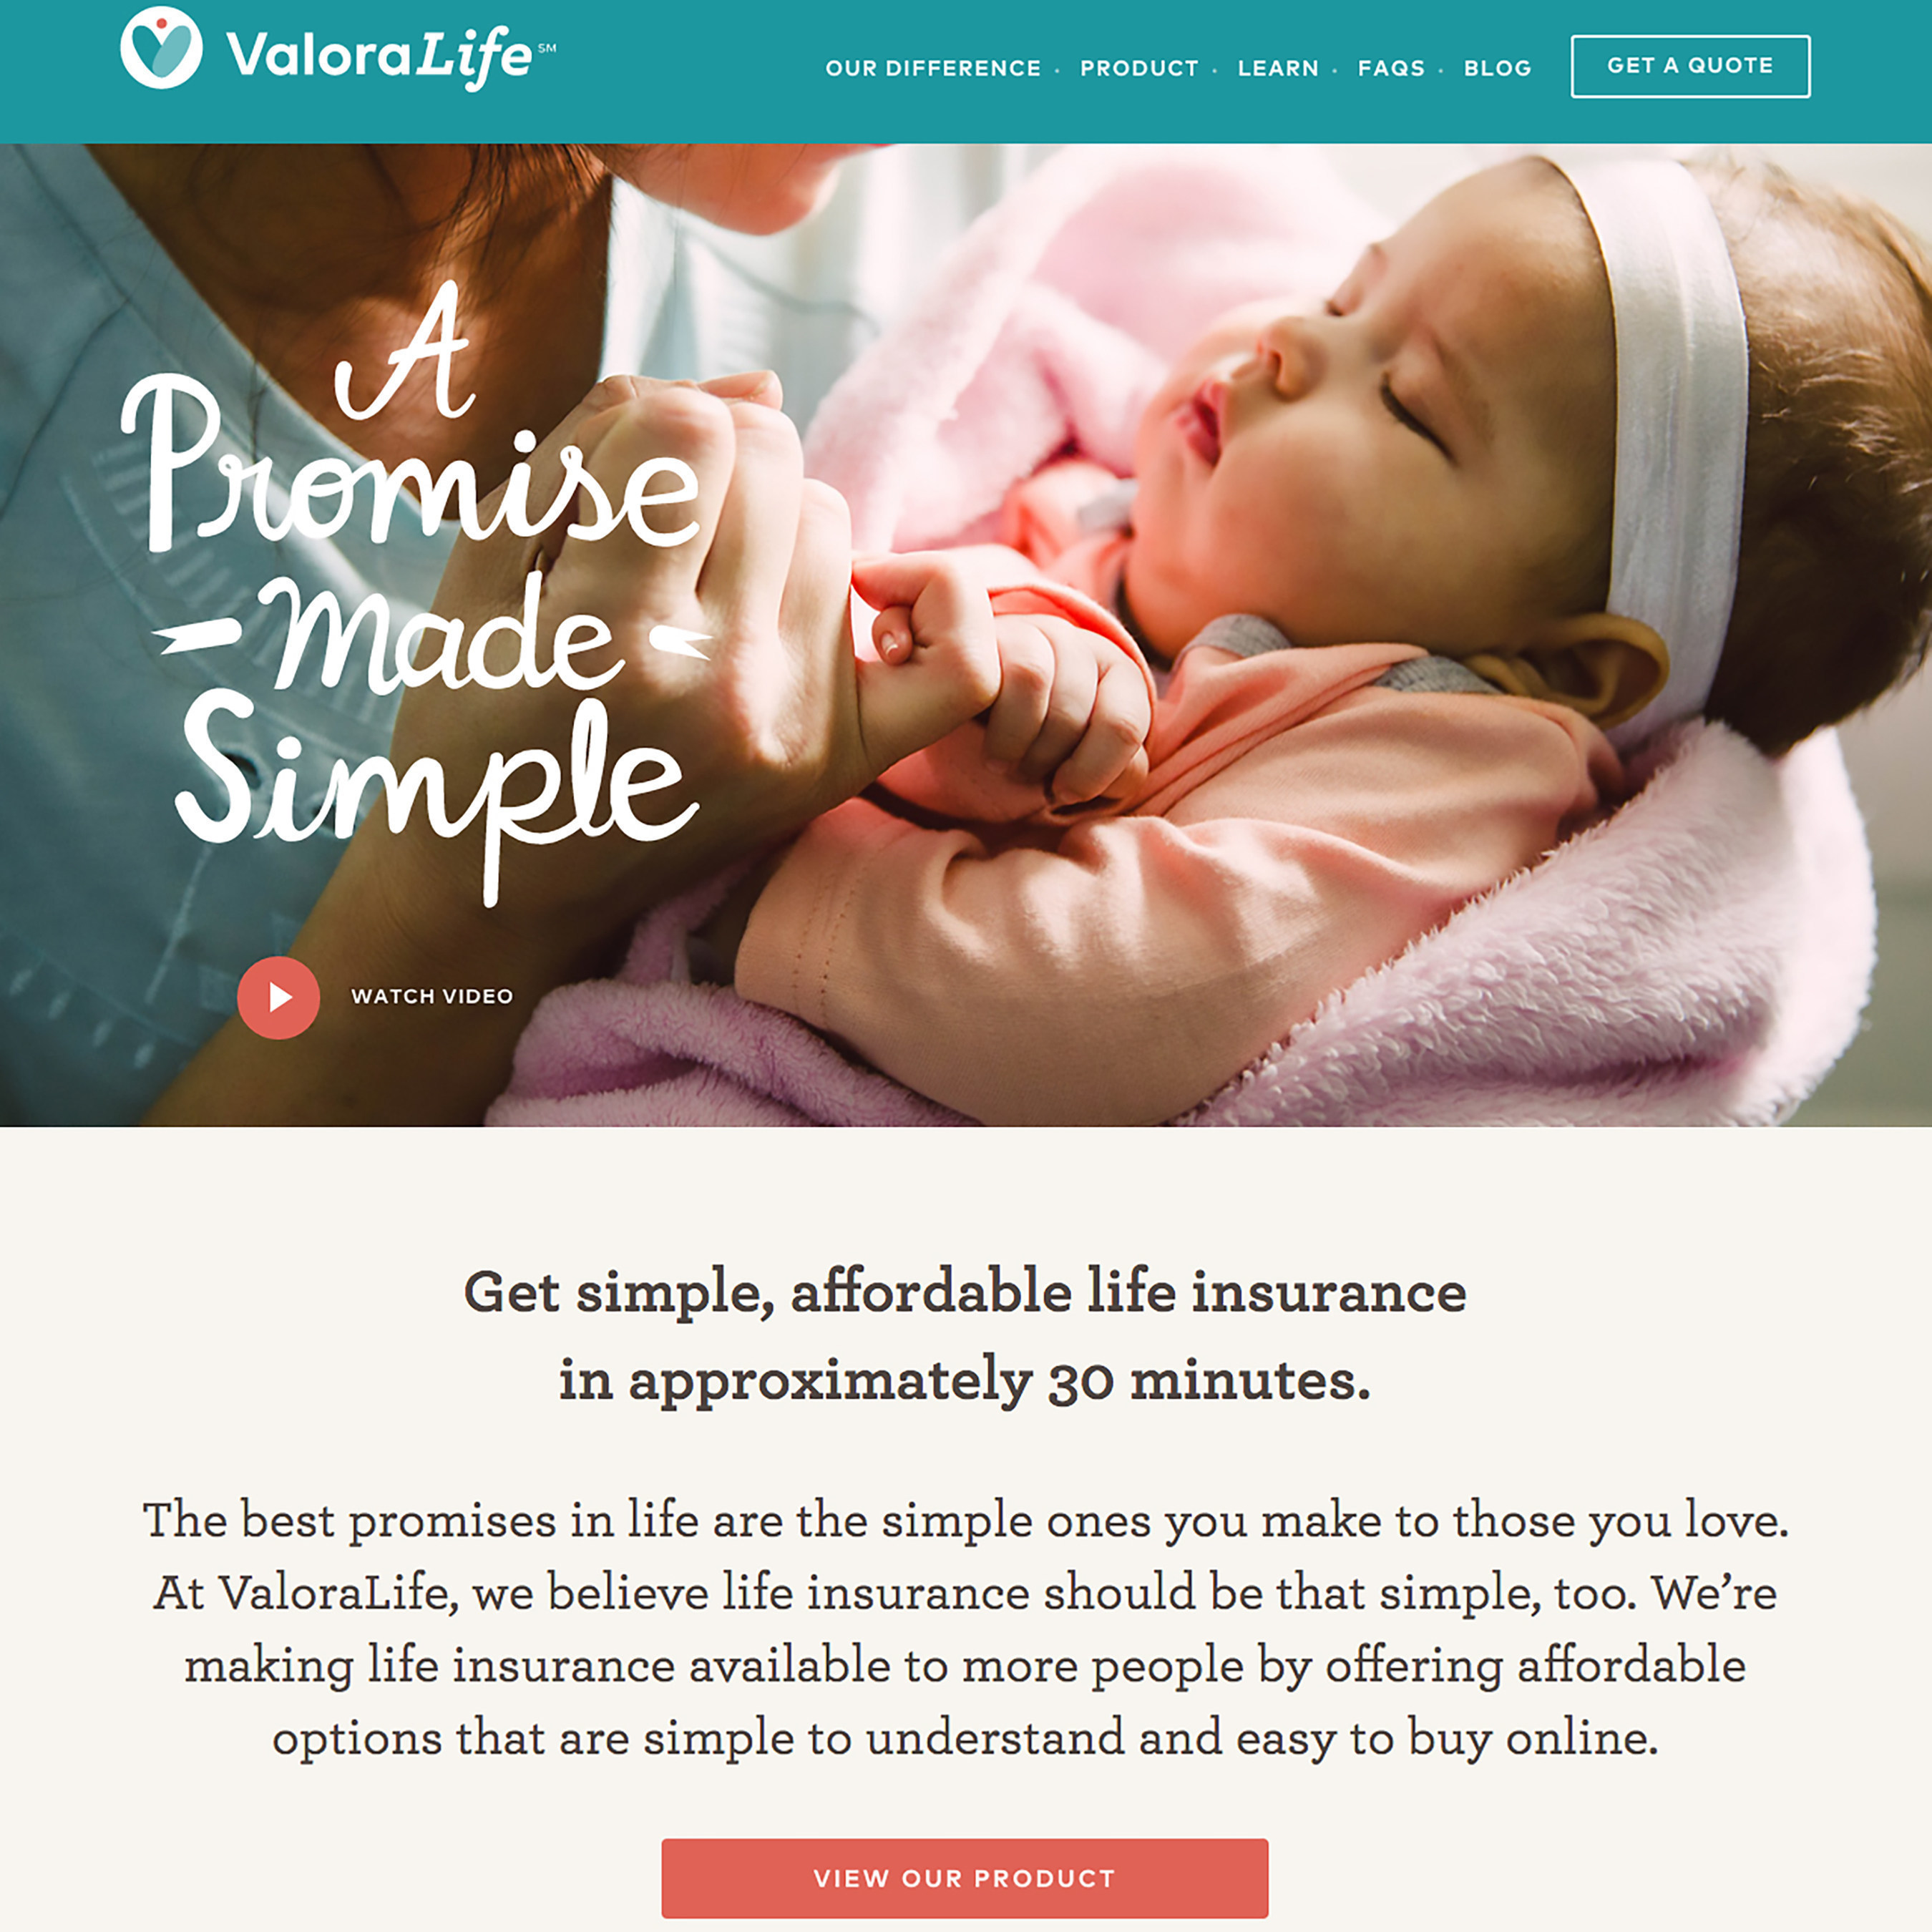 MassMutual Launches ValoraLife, a Simple, Quick Way to Buy ...